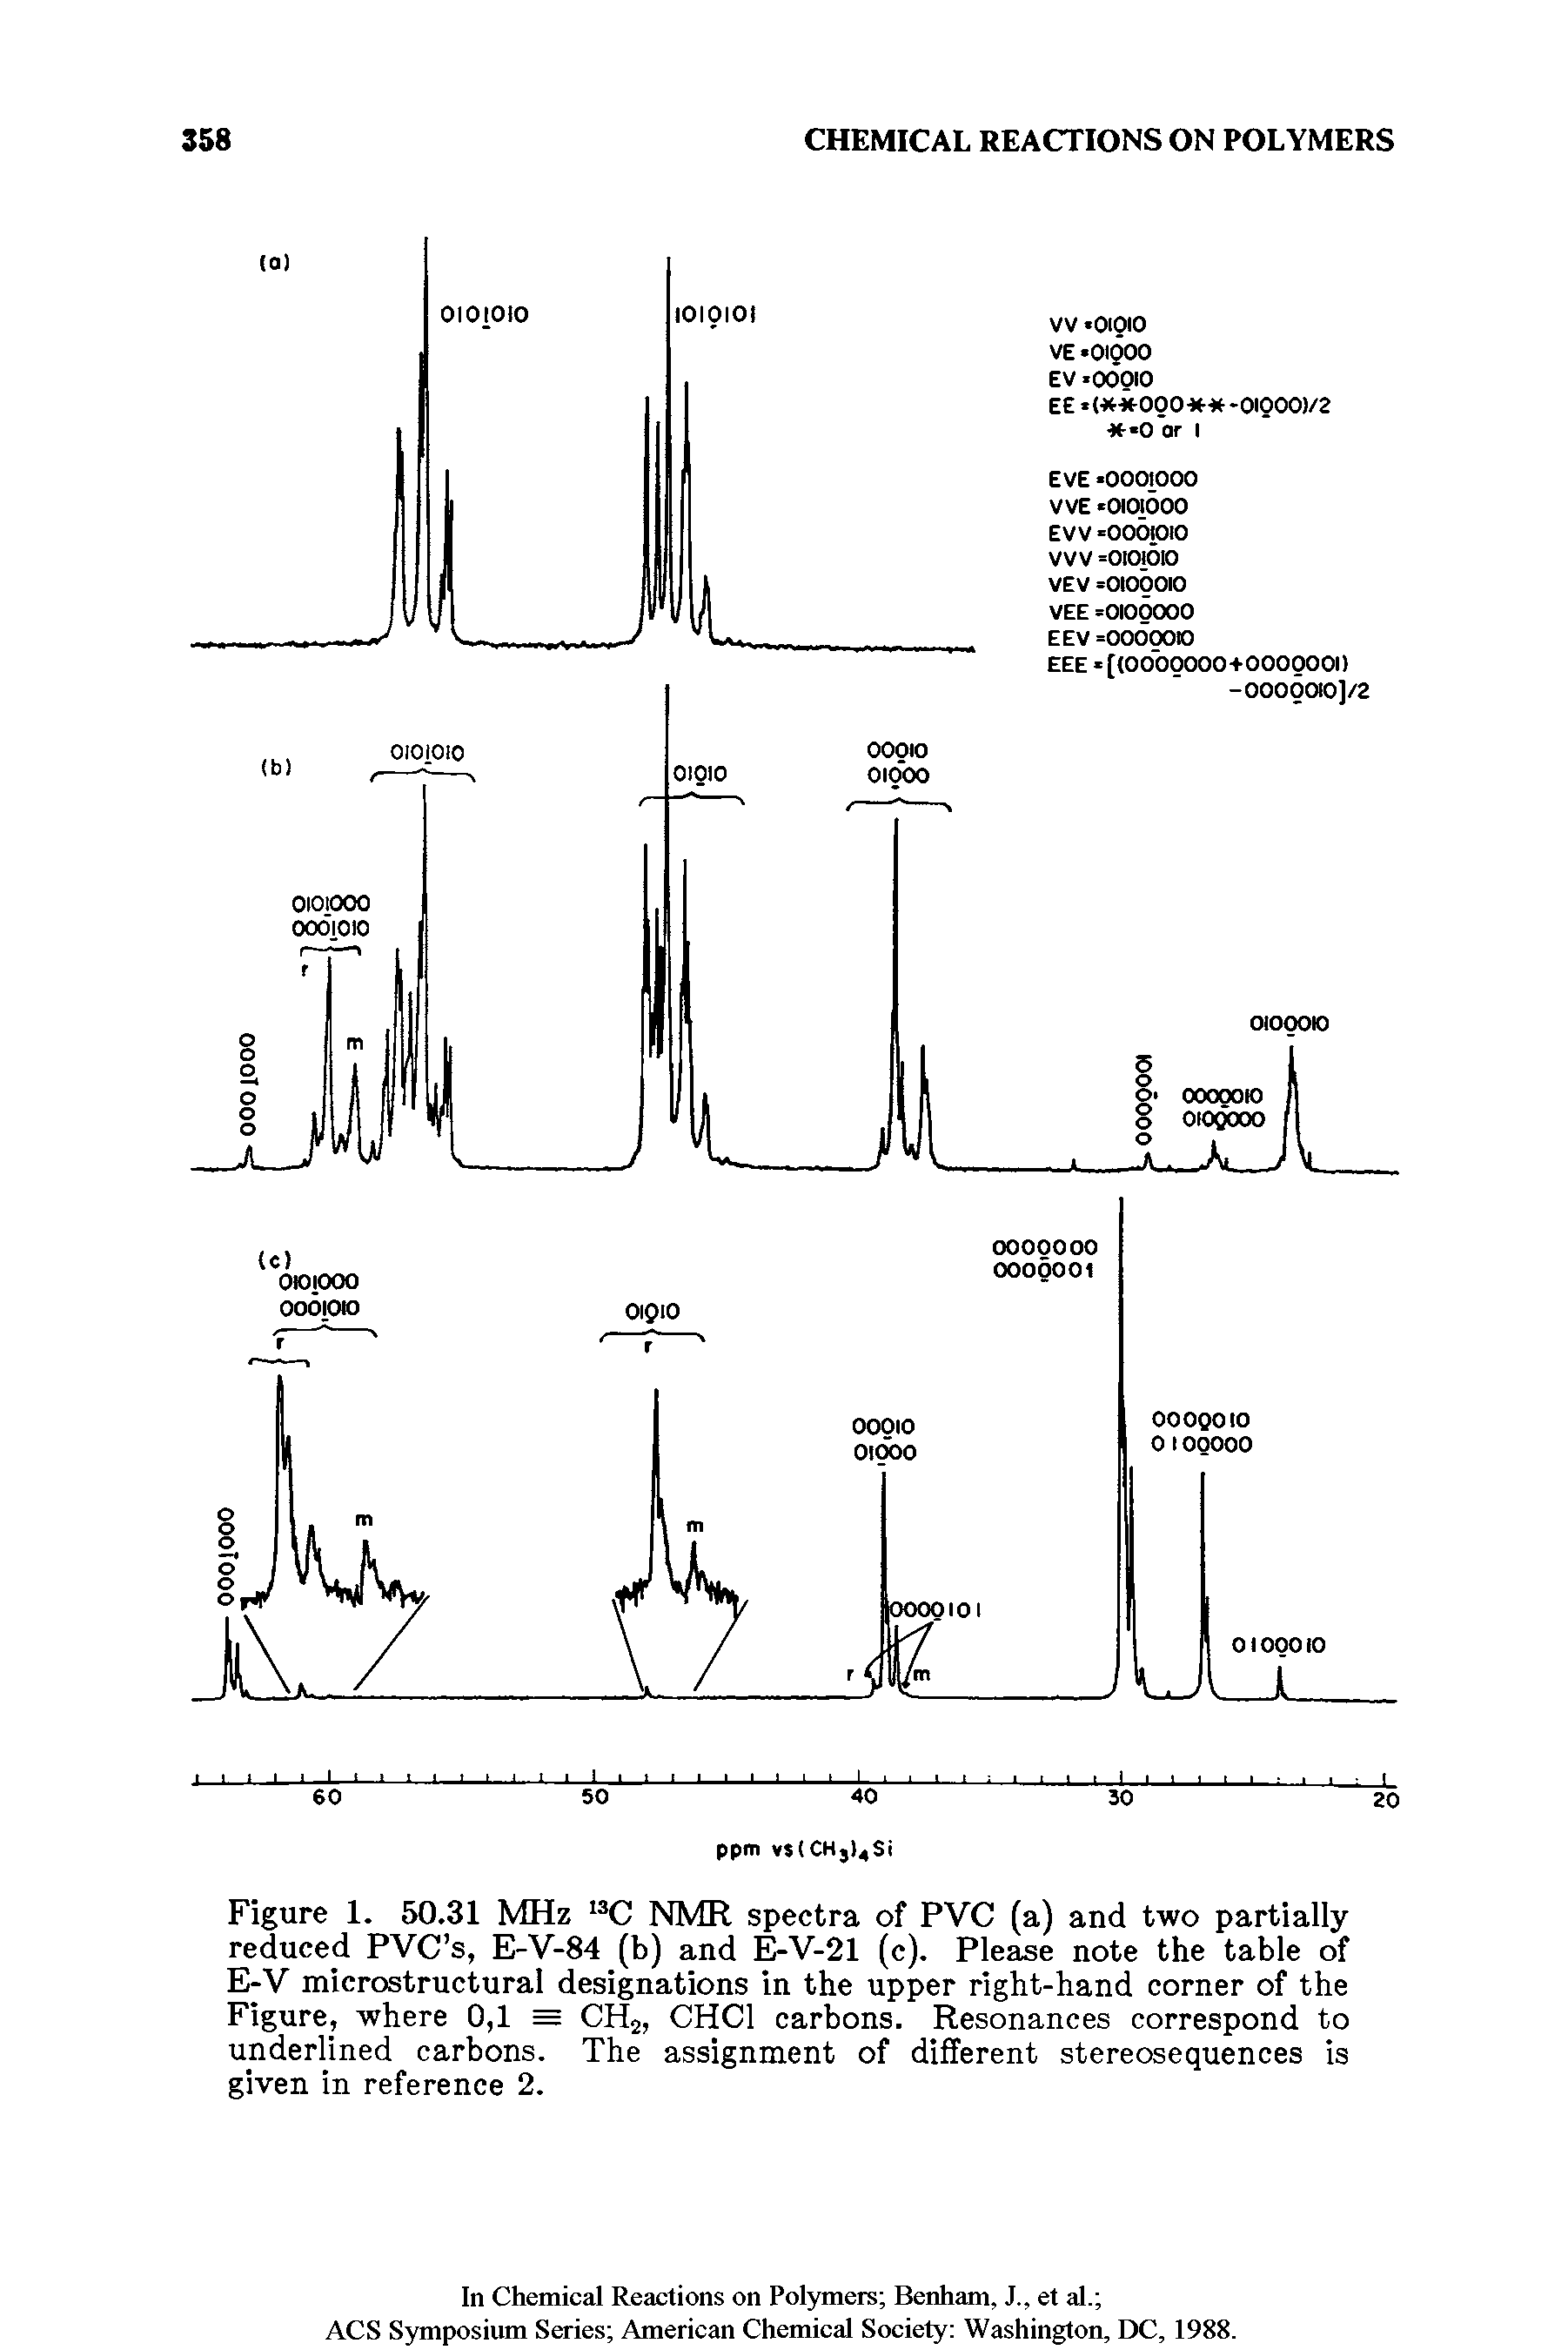 Figure 1. 50.31 MHz I3C NMR spectra of PVC (a) and two partially reduced PVC s, E-V-84 (b) and E-V-21 (c). Please note the table of E-V microstructural designations in the upper right-hand corner of the Figure, where 0,1 = CH2, CHC1 carbons. Resonances correspond to underlined carbons. The assignment of different stereosequences is given in reference 2.